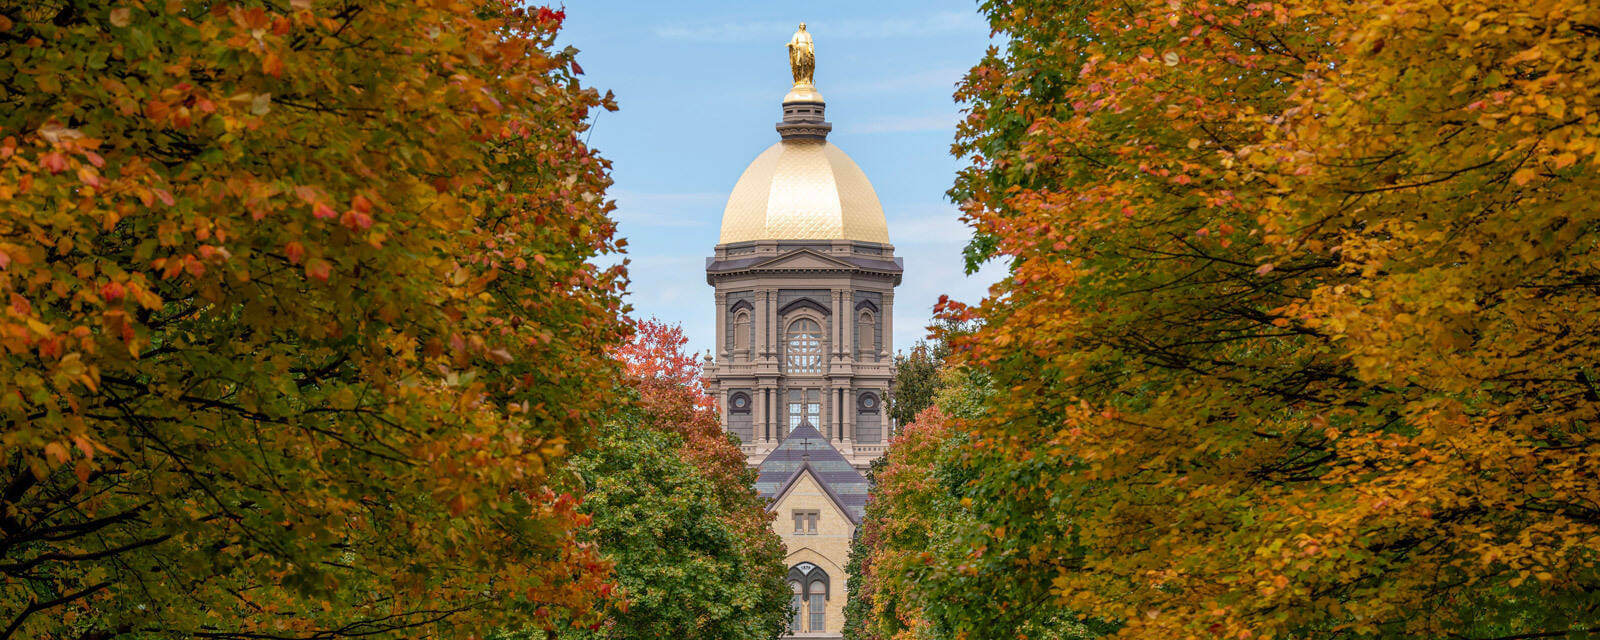 Notre Dame's Golden Dome surrounded by trees in early fall.